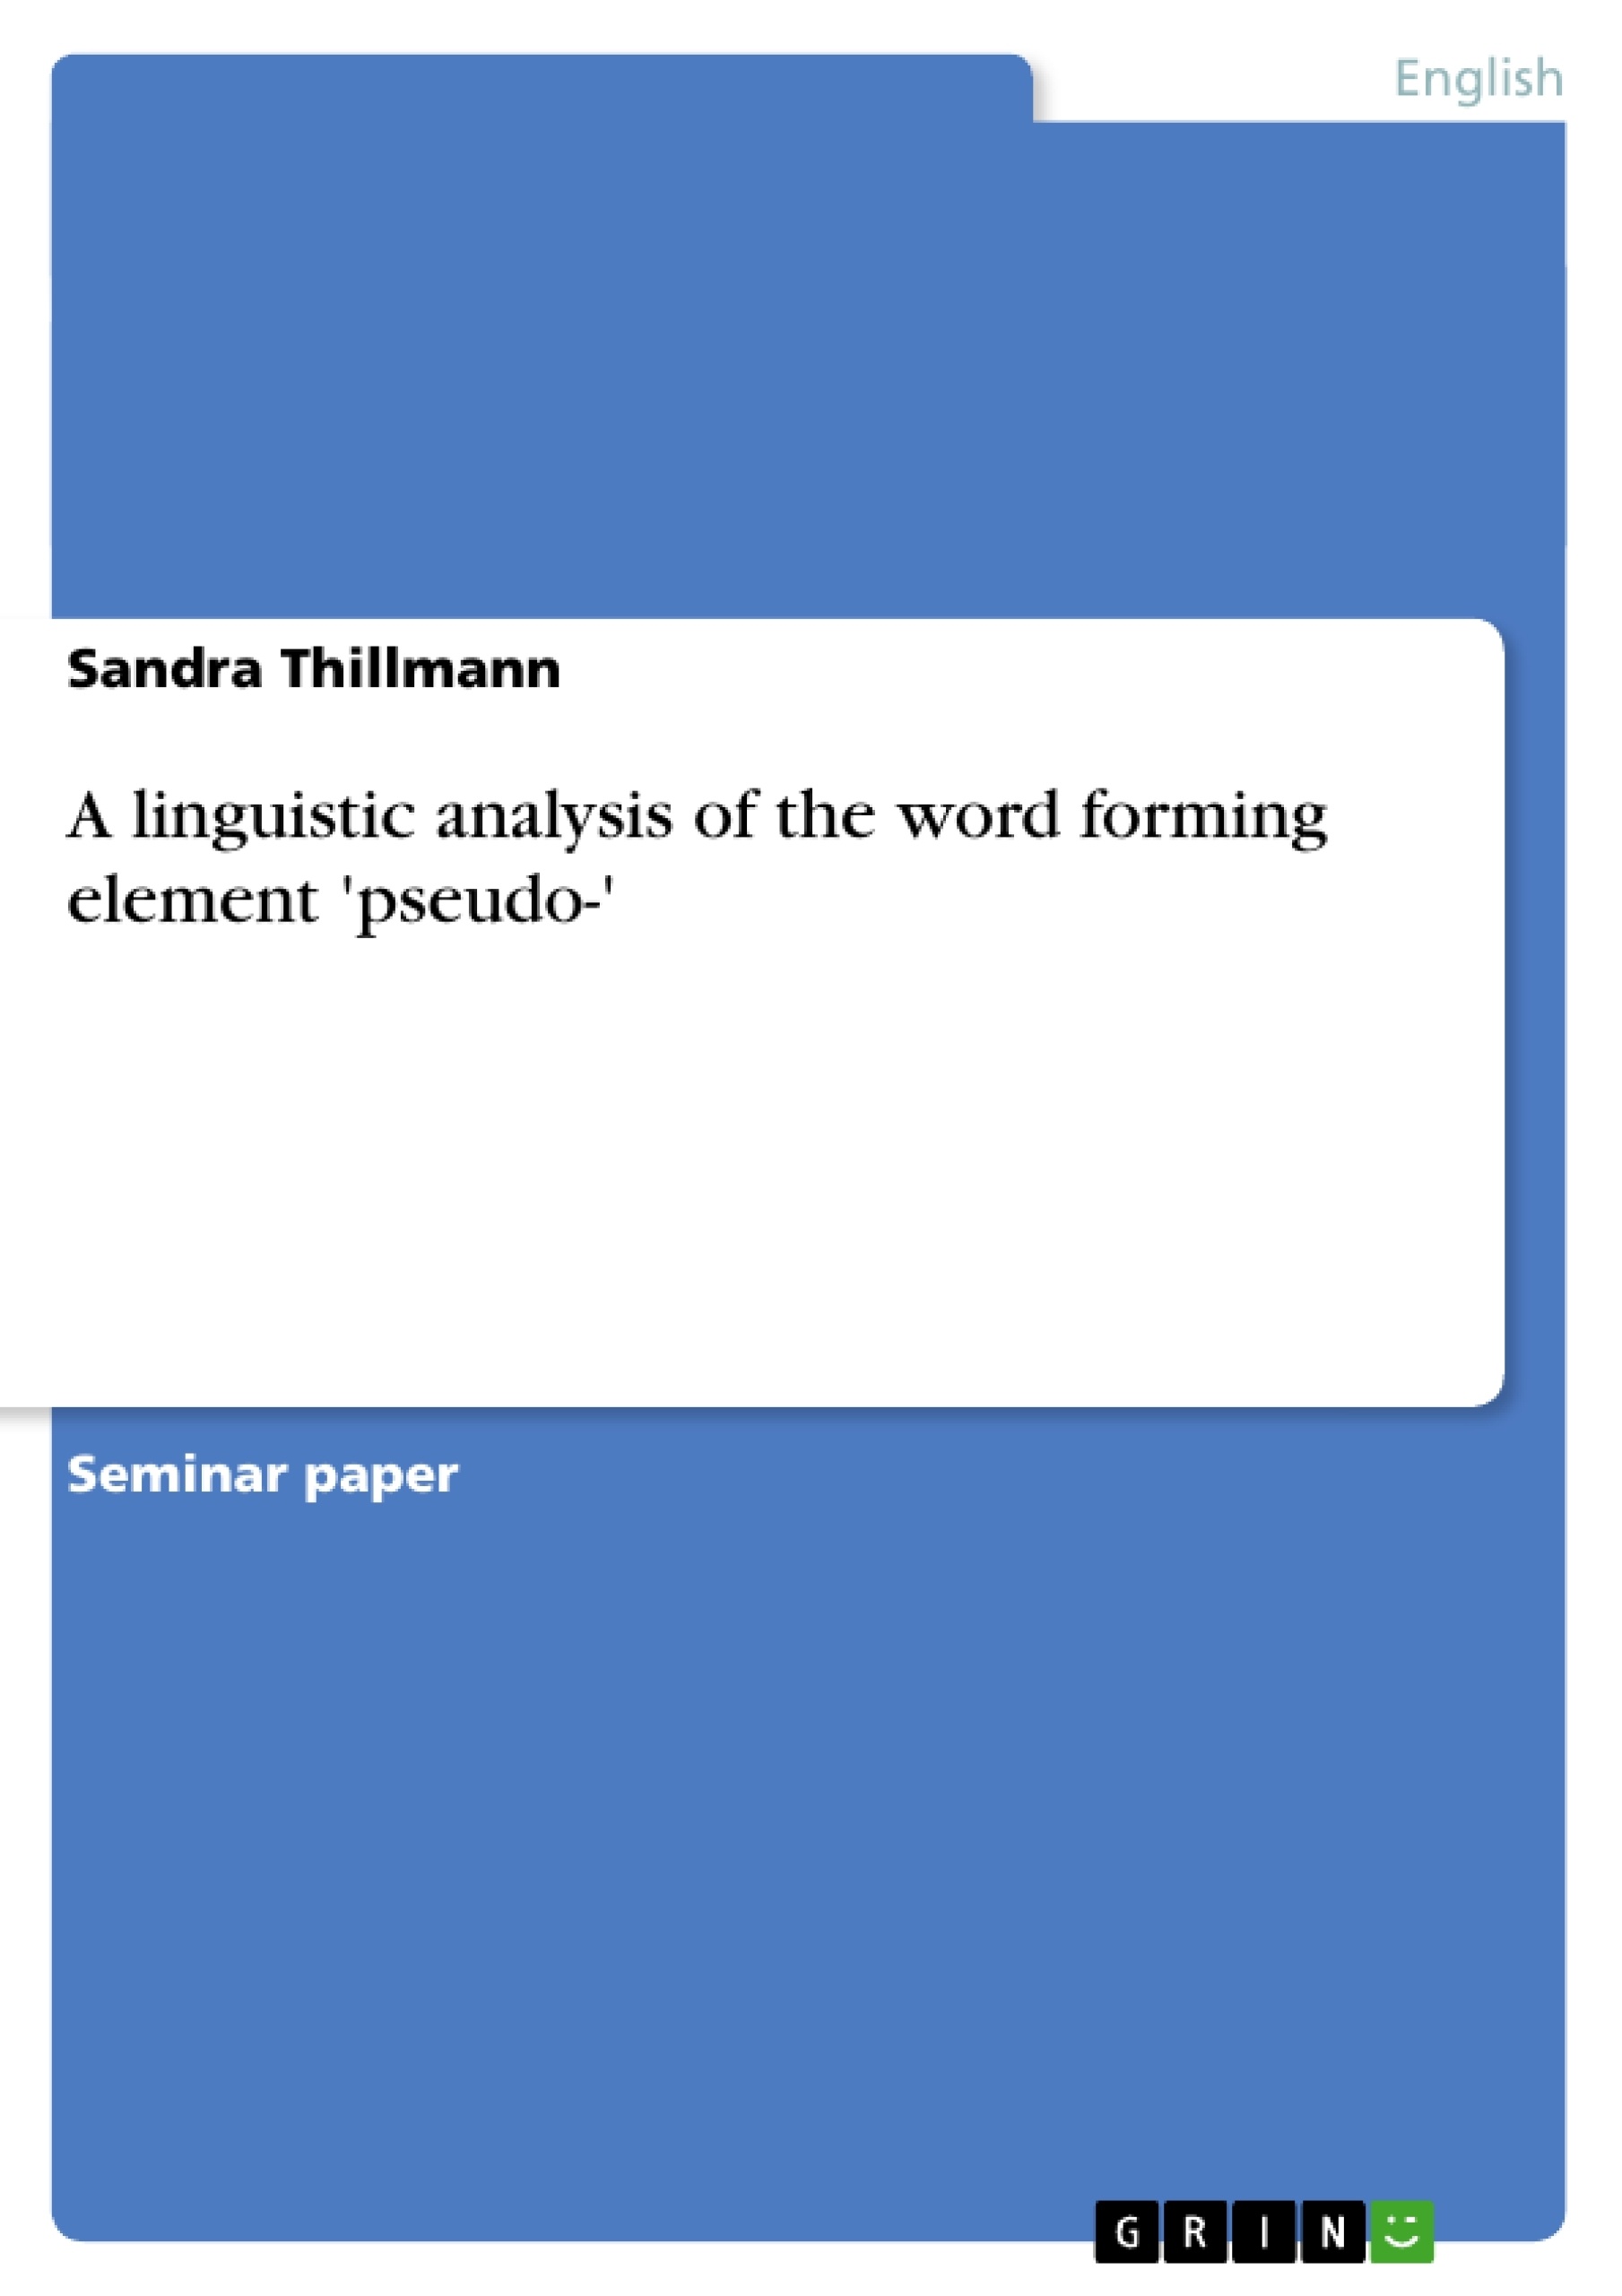 Titre: A linguistic analysis of the word forming element 'pseudo-'